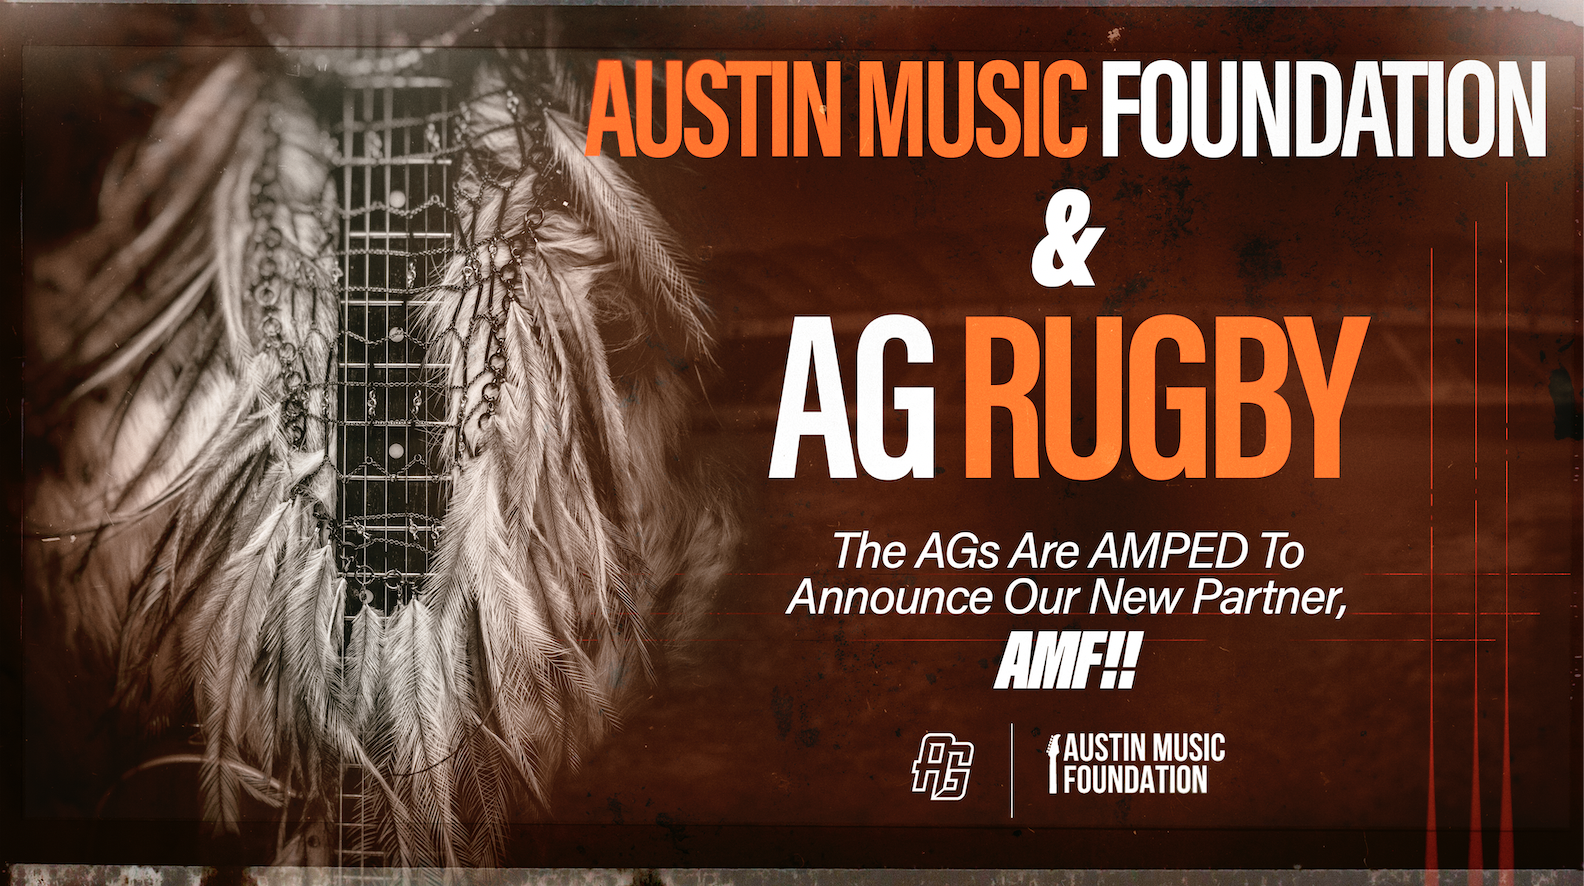 AG Rugby Teams Up With Austin Music Foundation